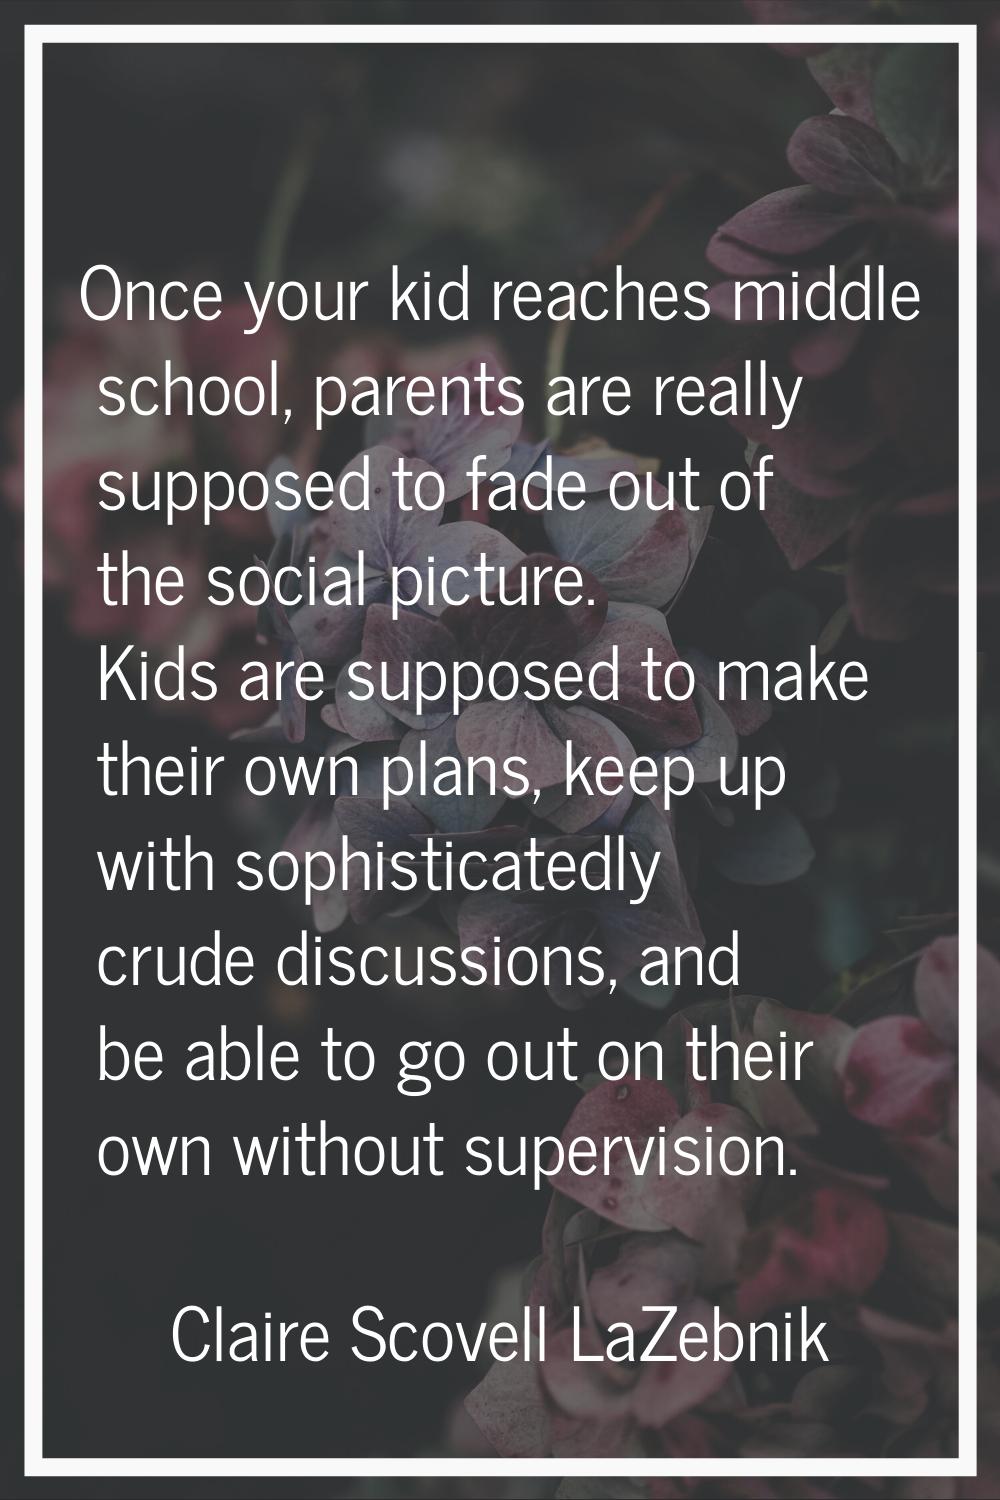 Once your kid reaches middle school, parents are really supposed to fade out of the social picture.